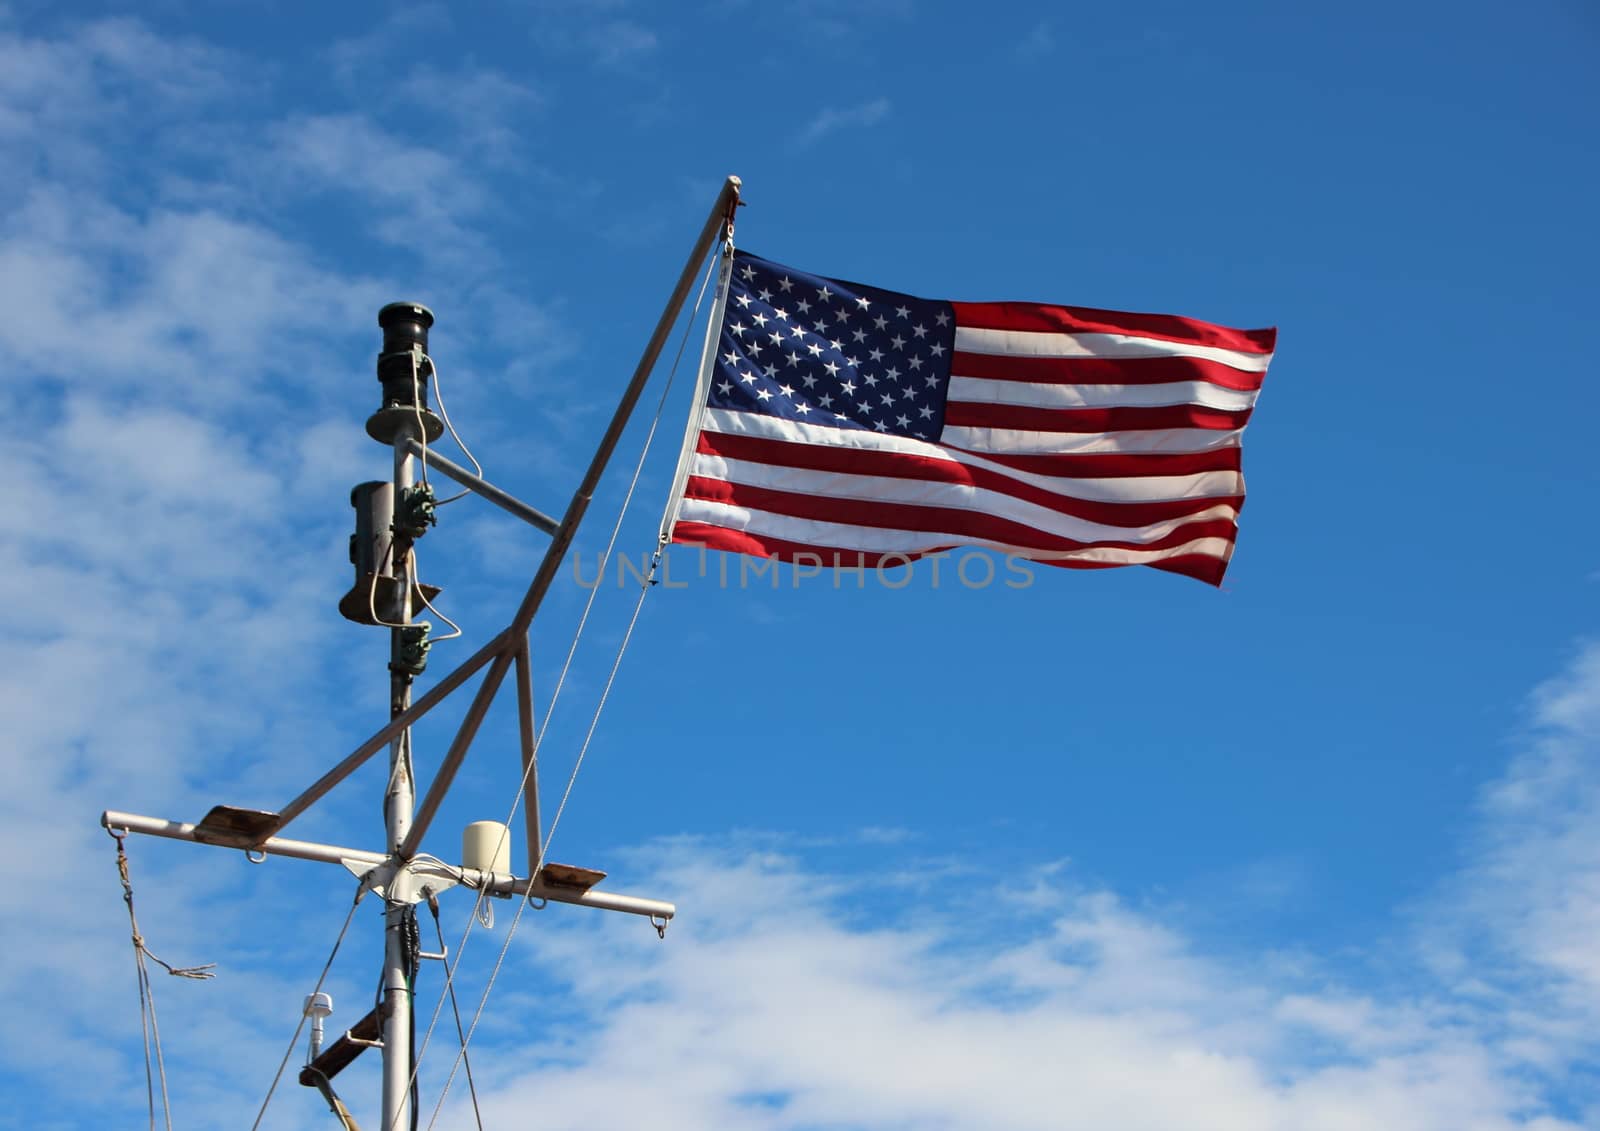 Maritime Windy American Stars and Stripes Flag on Ship Pole with Blue Sky